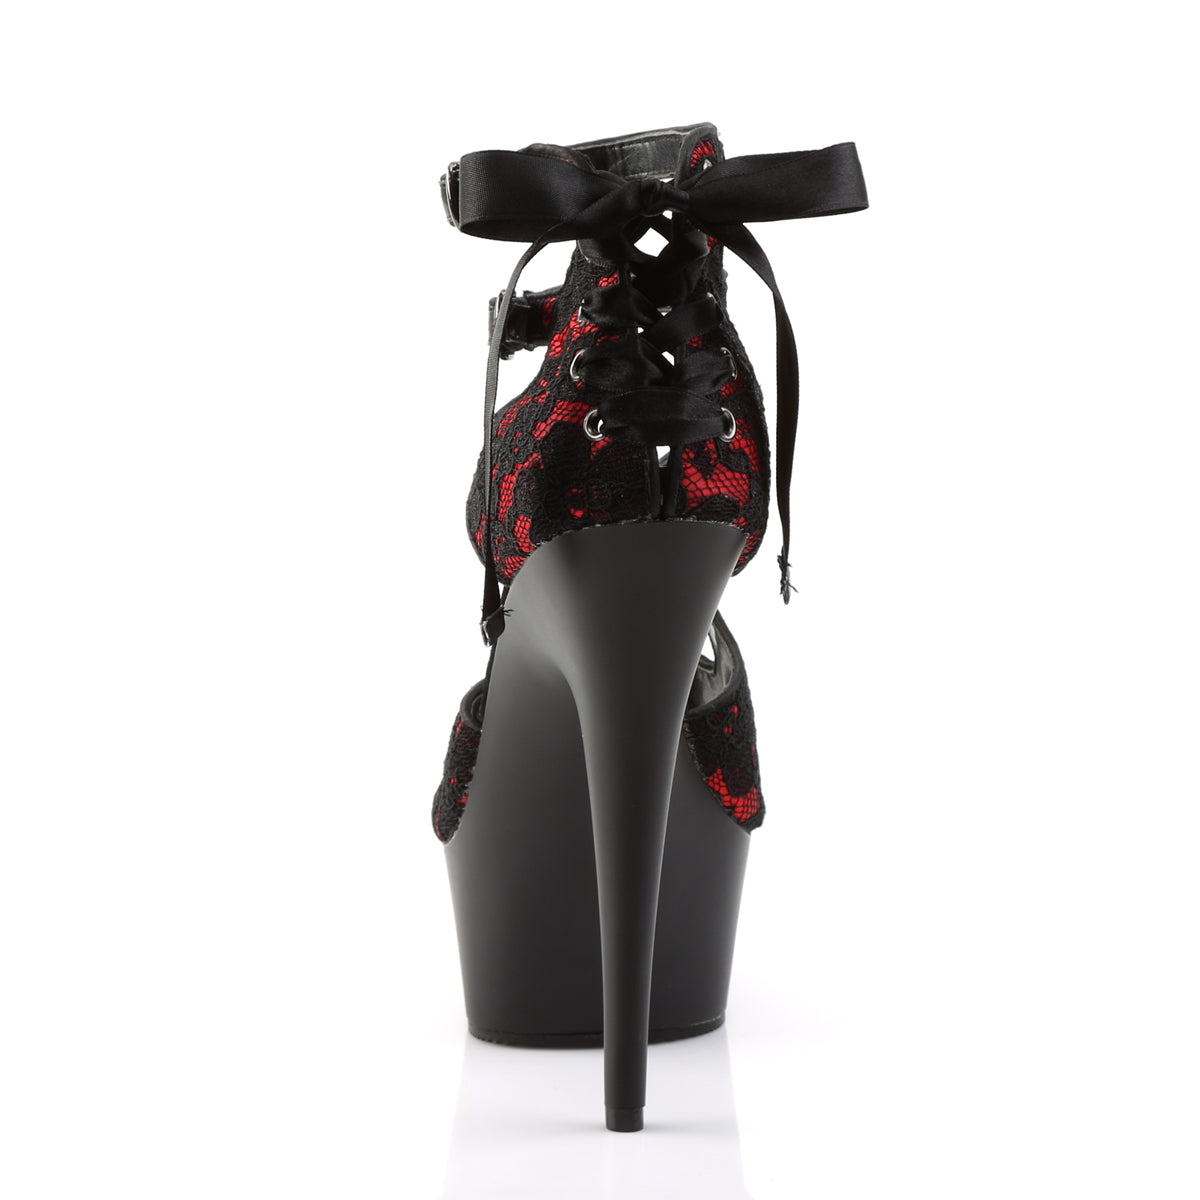 DELIGHT-678LC 6" Heel Red Satin Pole Dancing Platforms-Pleaser- Sexy Shoes Fetish Footwear